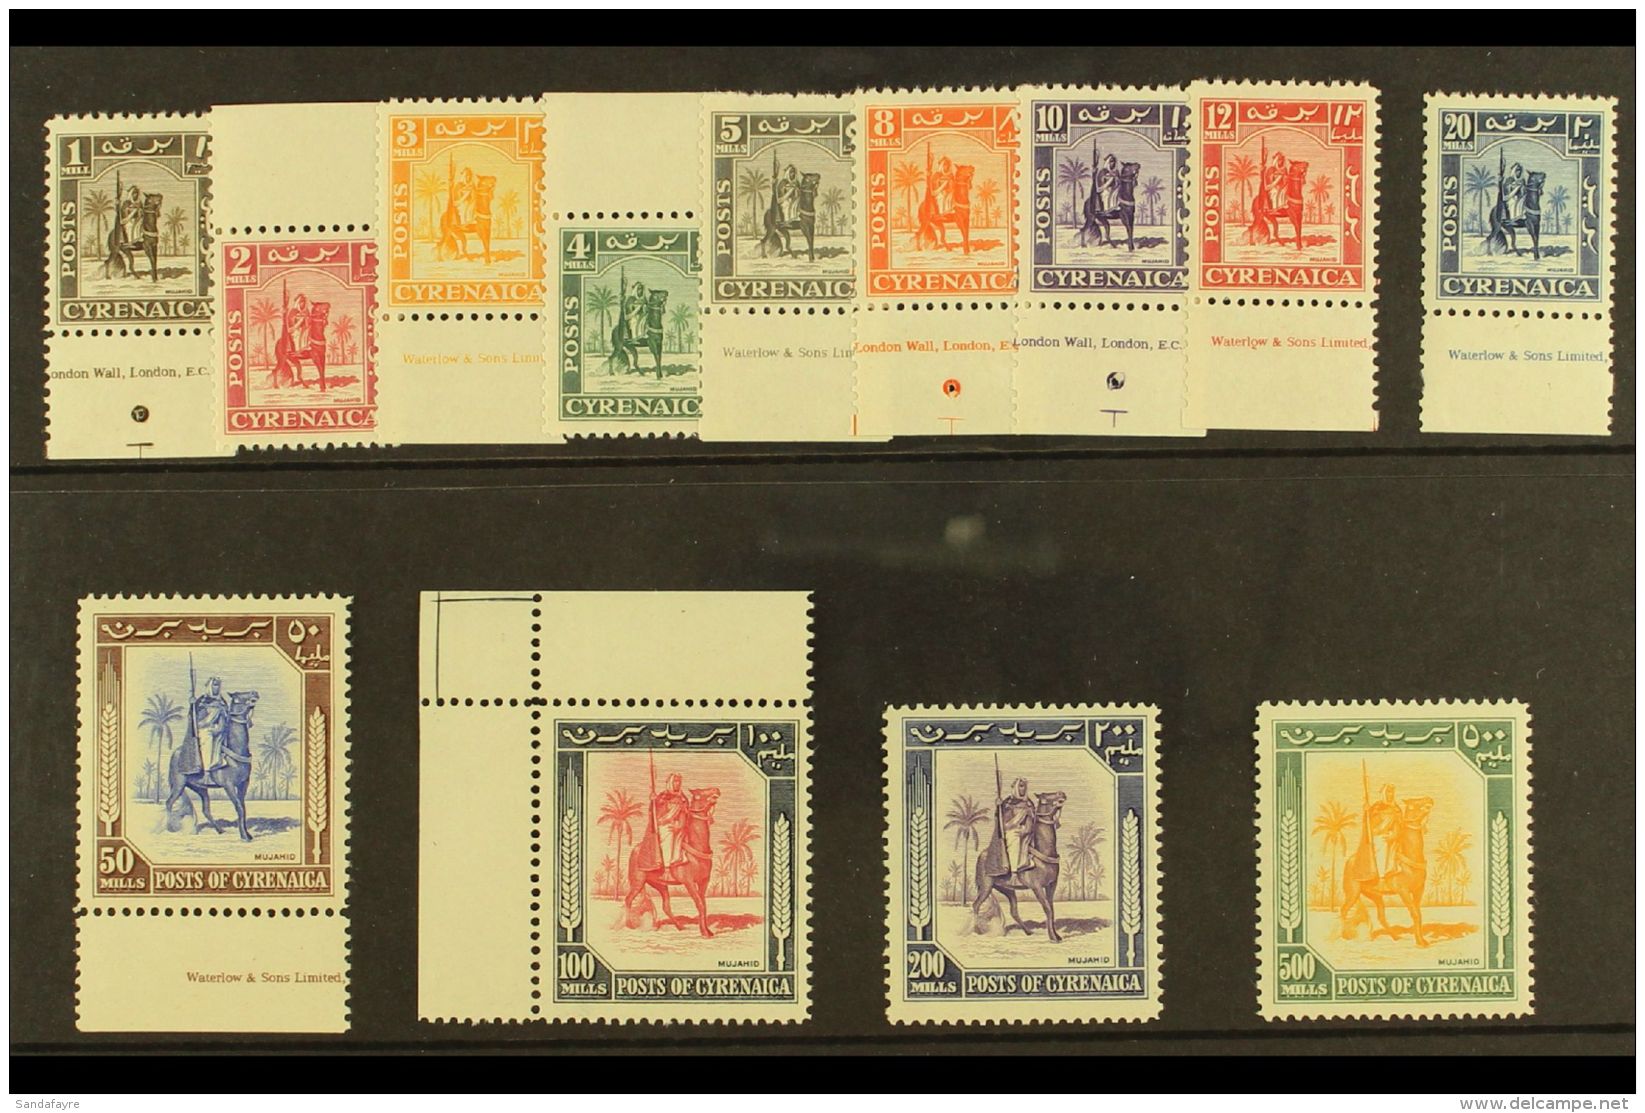 CYRENAICA 1950 "Mounted Warrior" Complete Definitive Set, SG 136/148, Never Hinged Mint. (13 Stamps) For More... - Africa Orientale Italiana